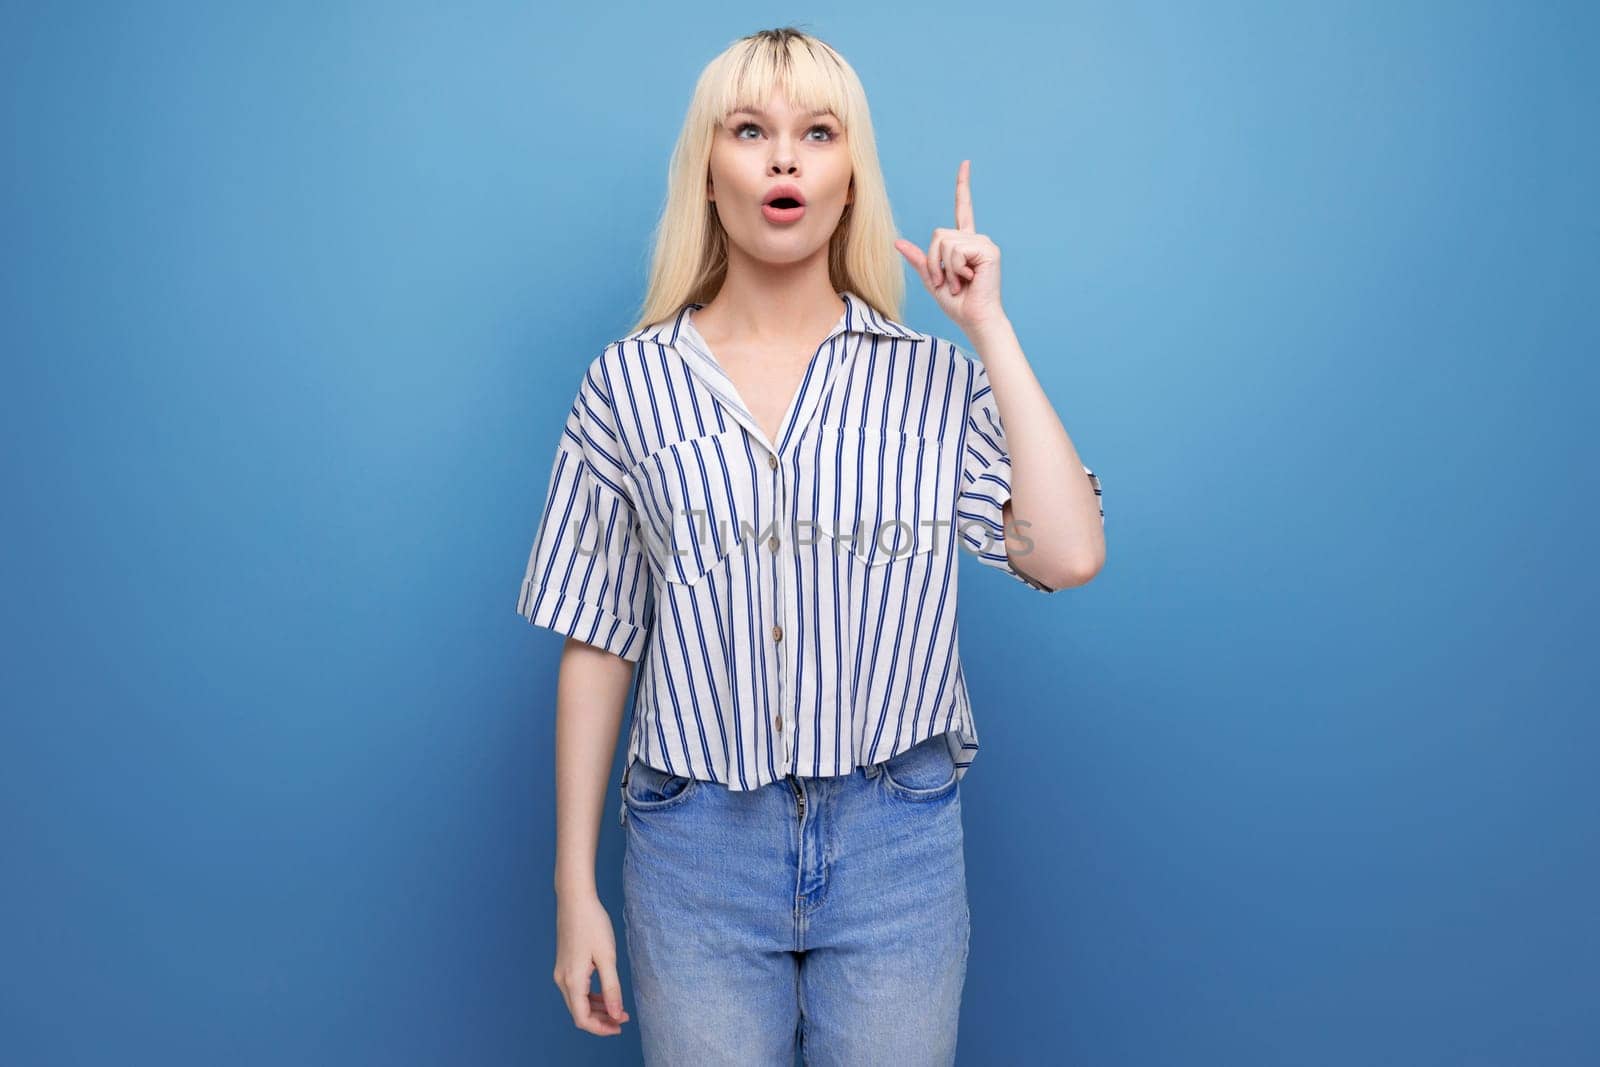 blond 25 year old woman person in striped blouse and jeans proposes an idea.